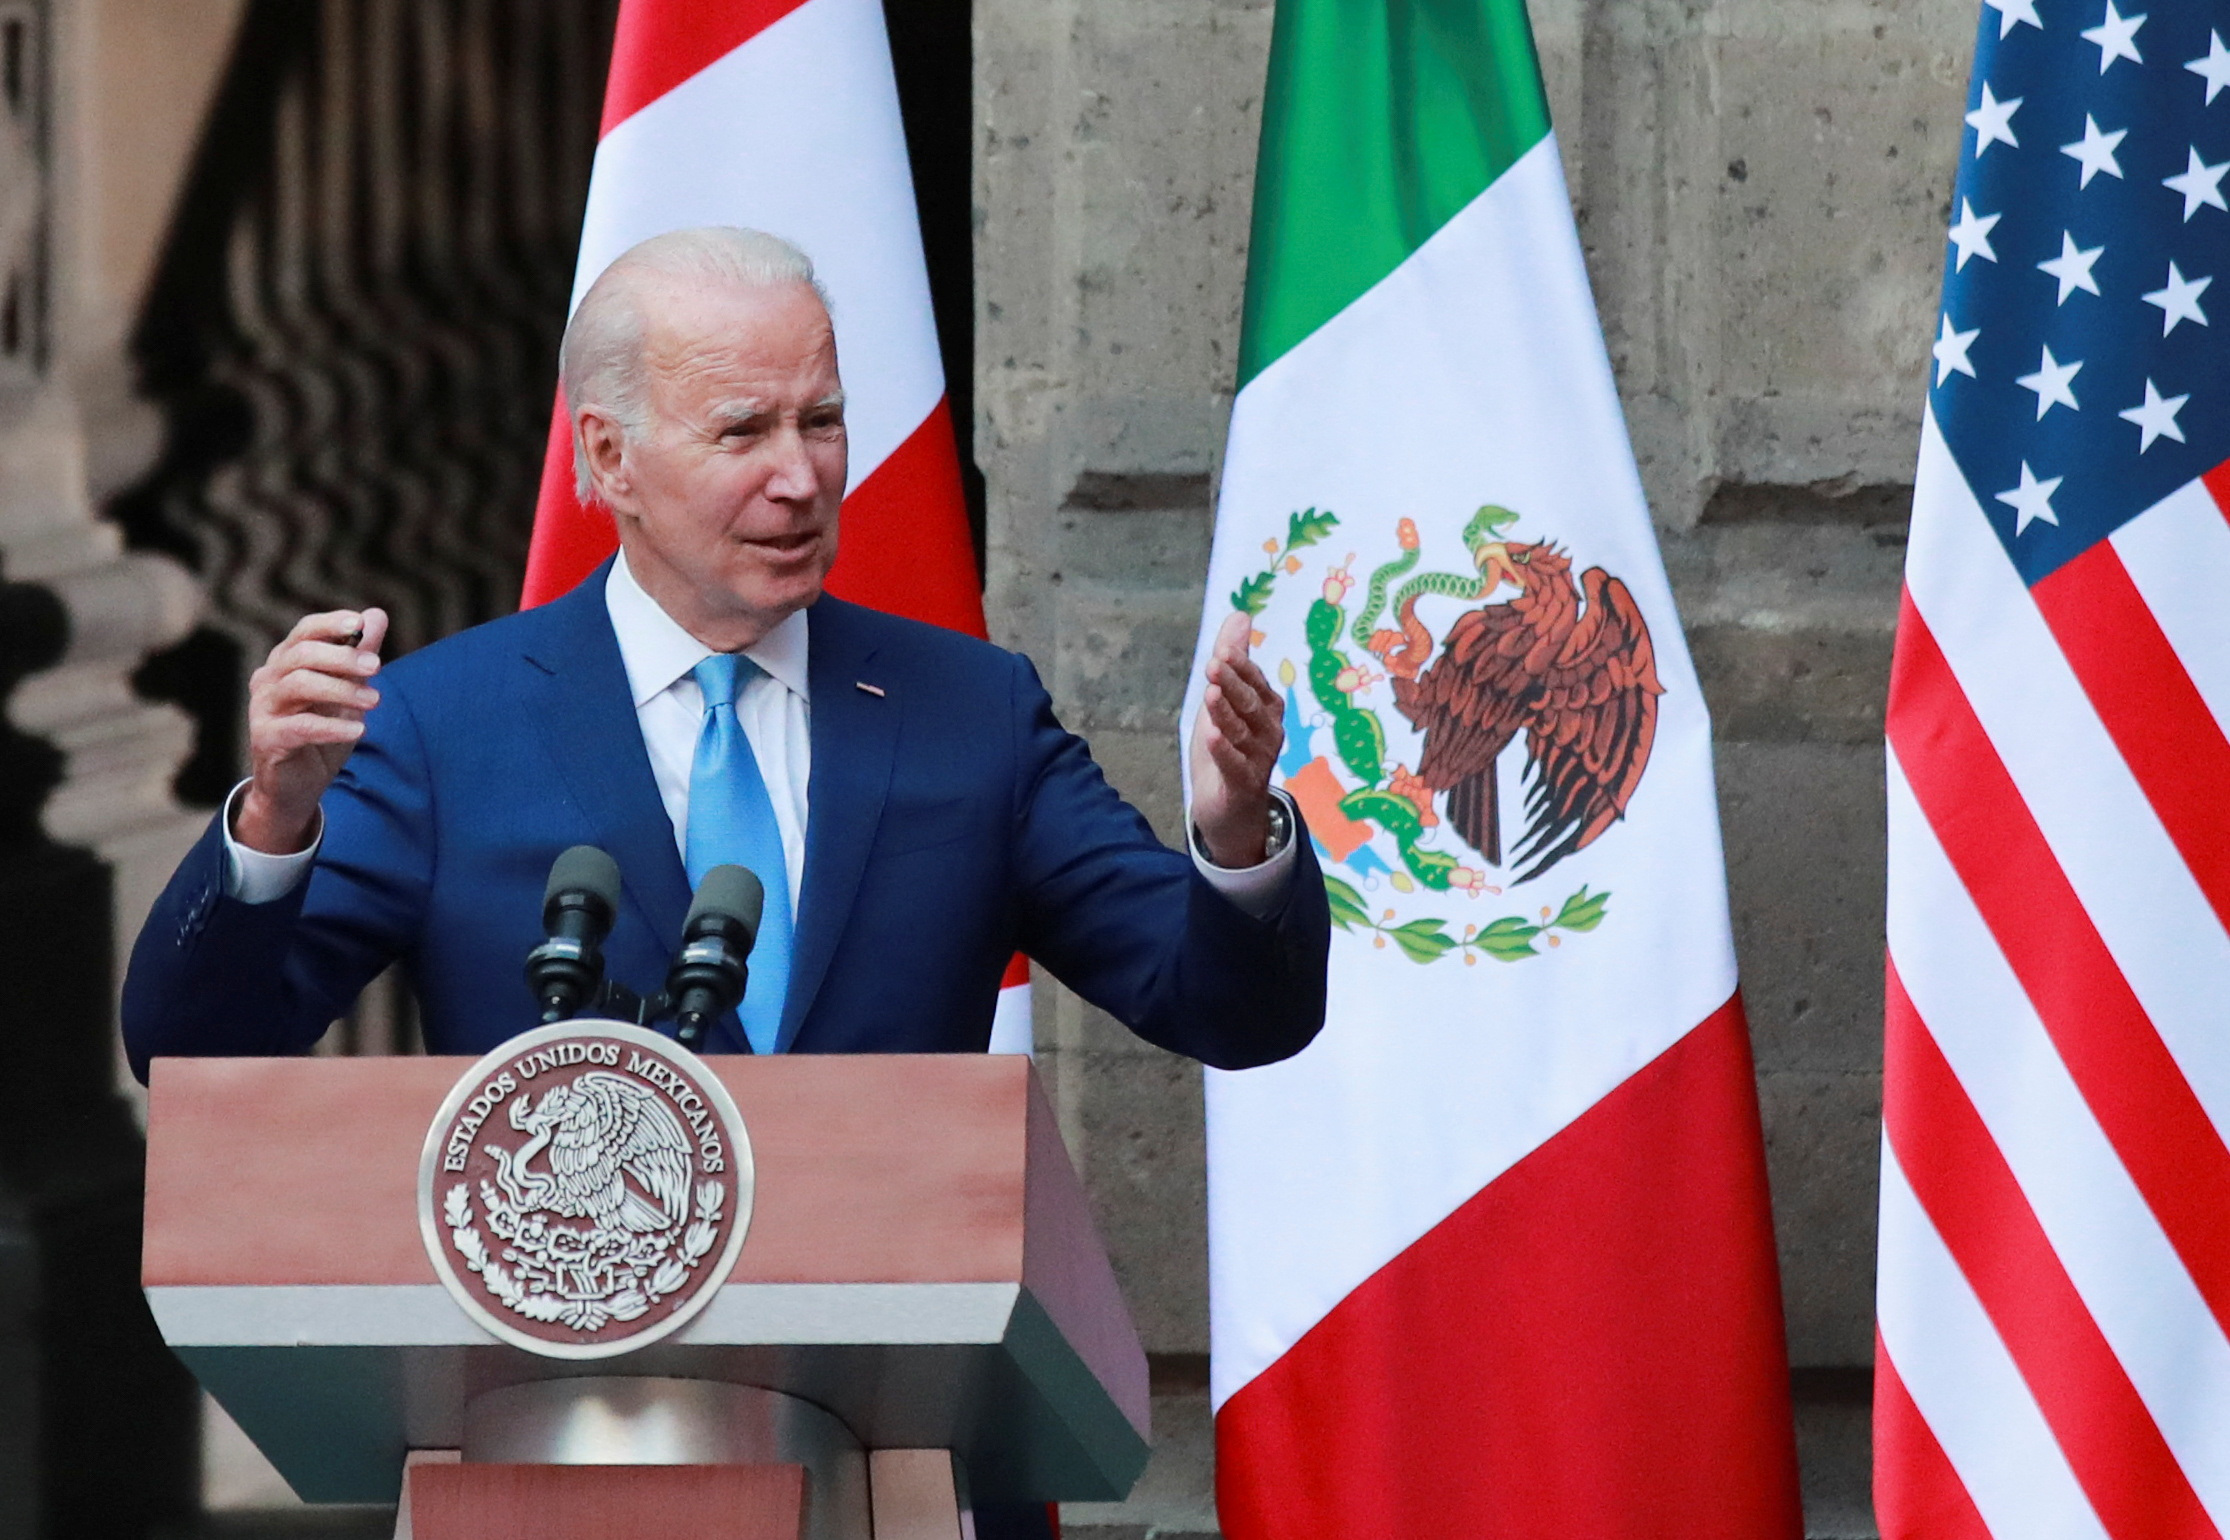 President Joe Biden during the closing conference with López Obrador and Justin Trudeau (Photo: Reuters)